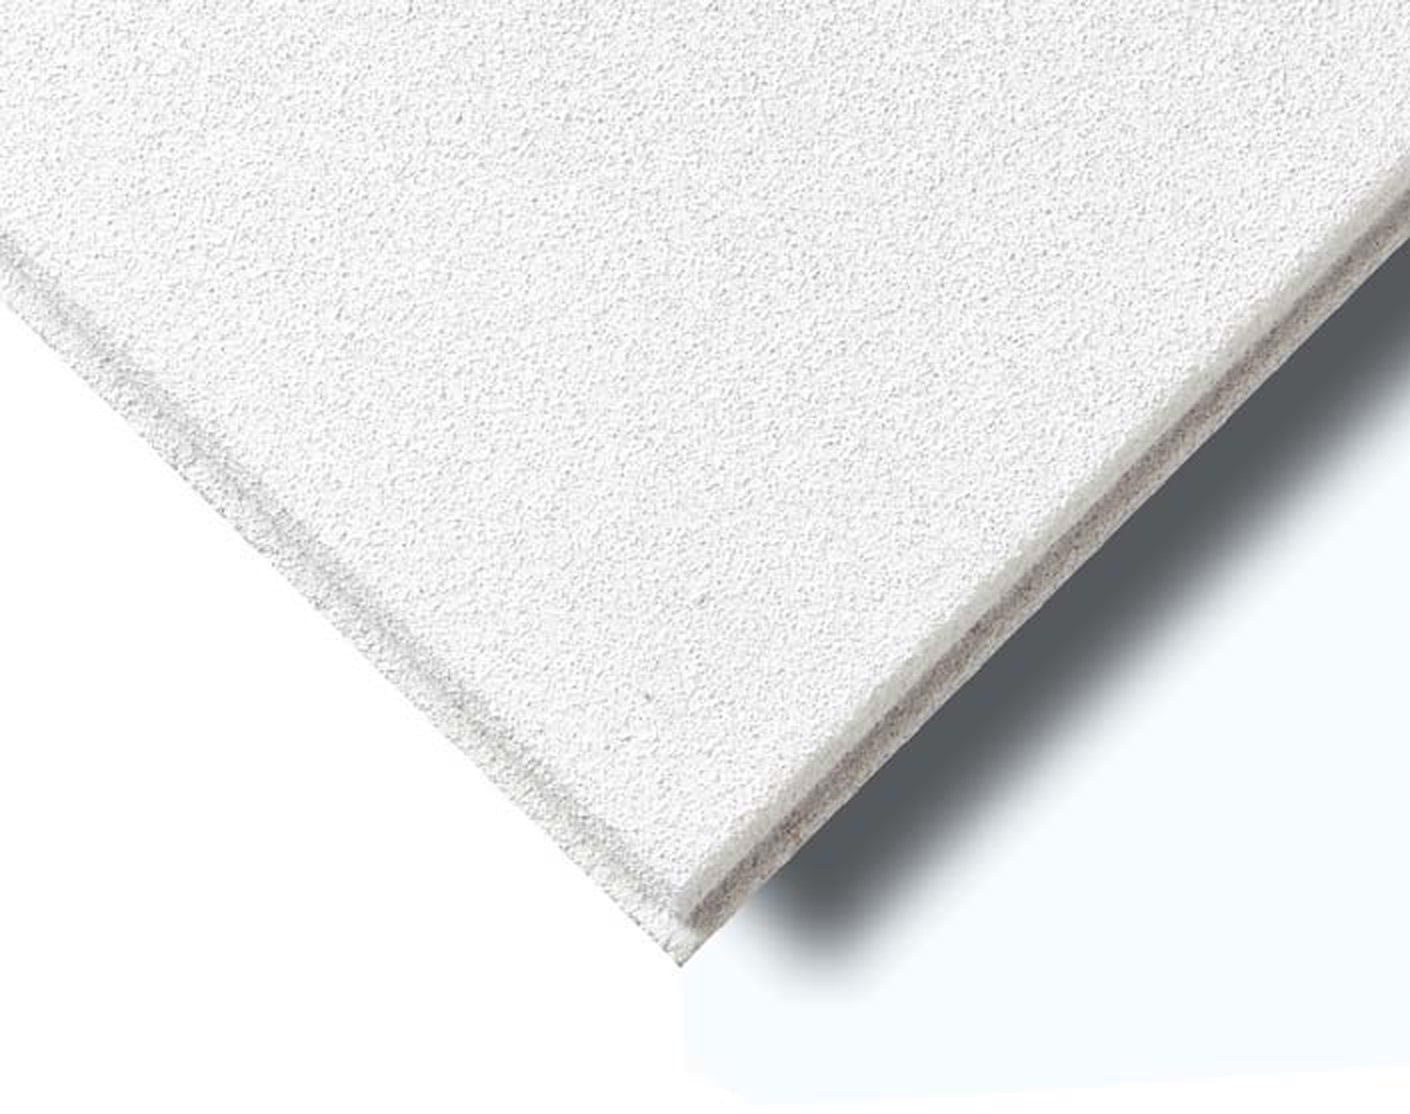 Armstrong Ultima Tegular Ceiling Tiles Armstrong Ultima Tegular Ceiling Tiles armstrong ultima plus 56ca nevill long interior systems 1410 X 1114